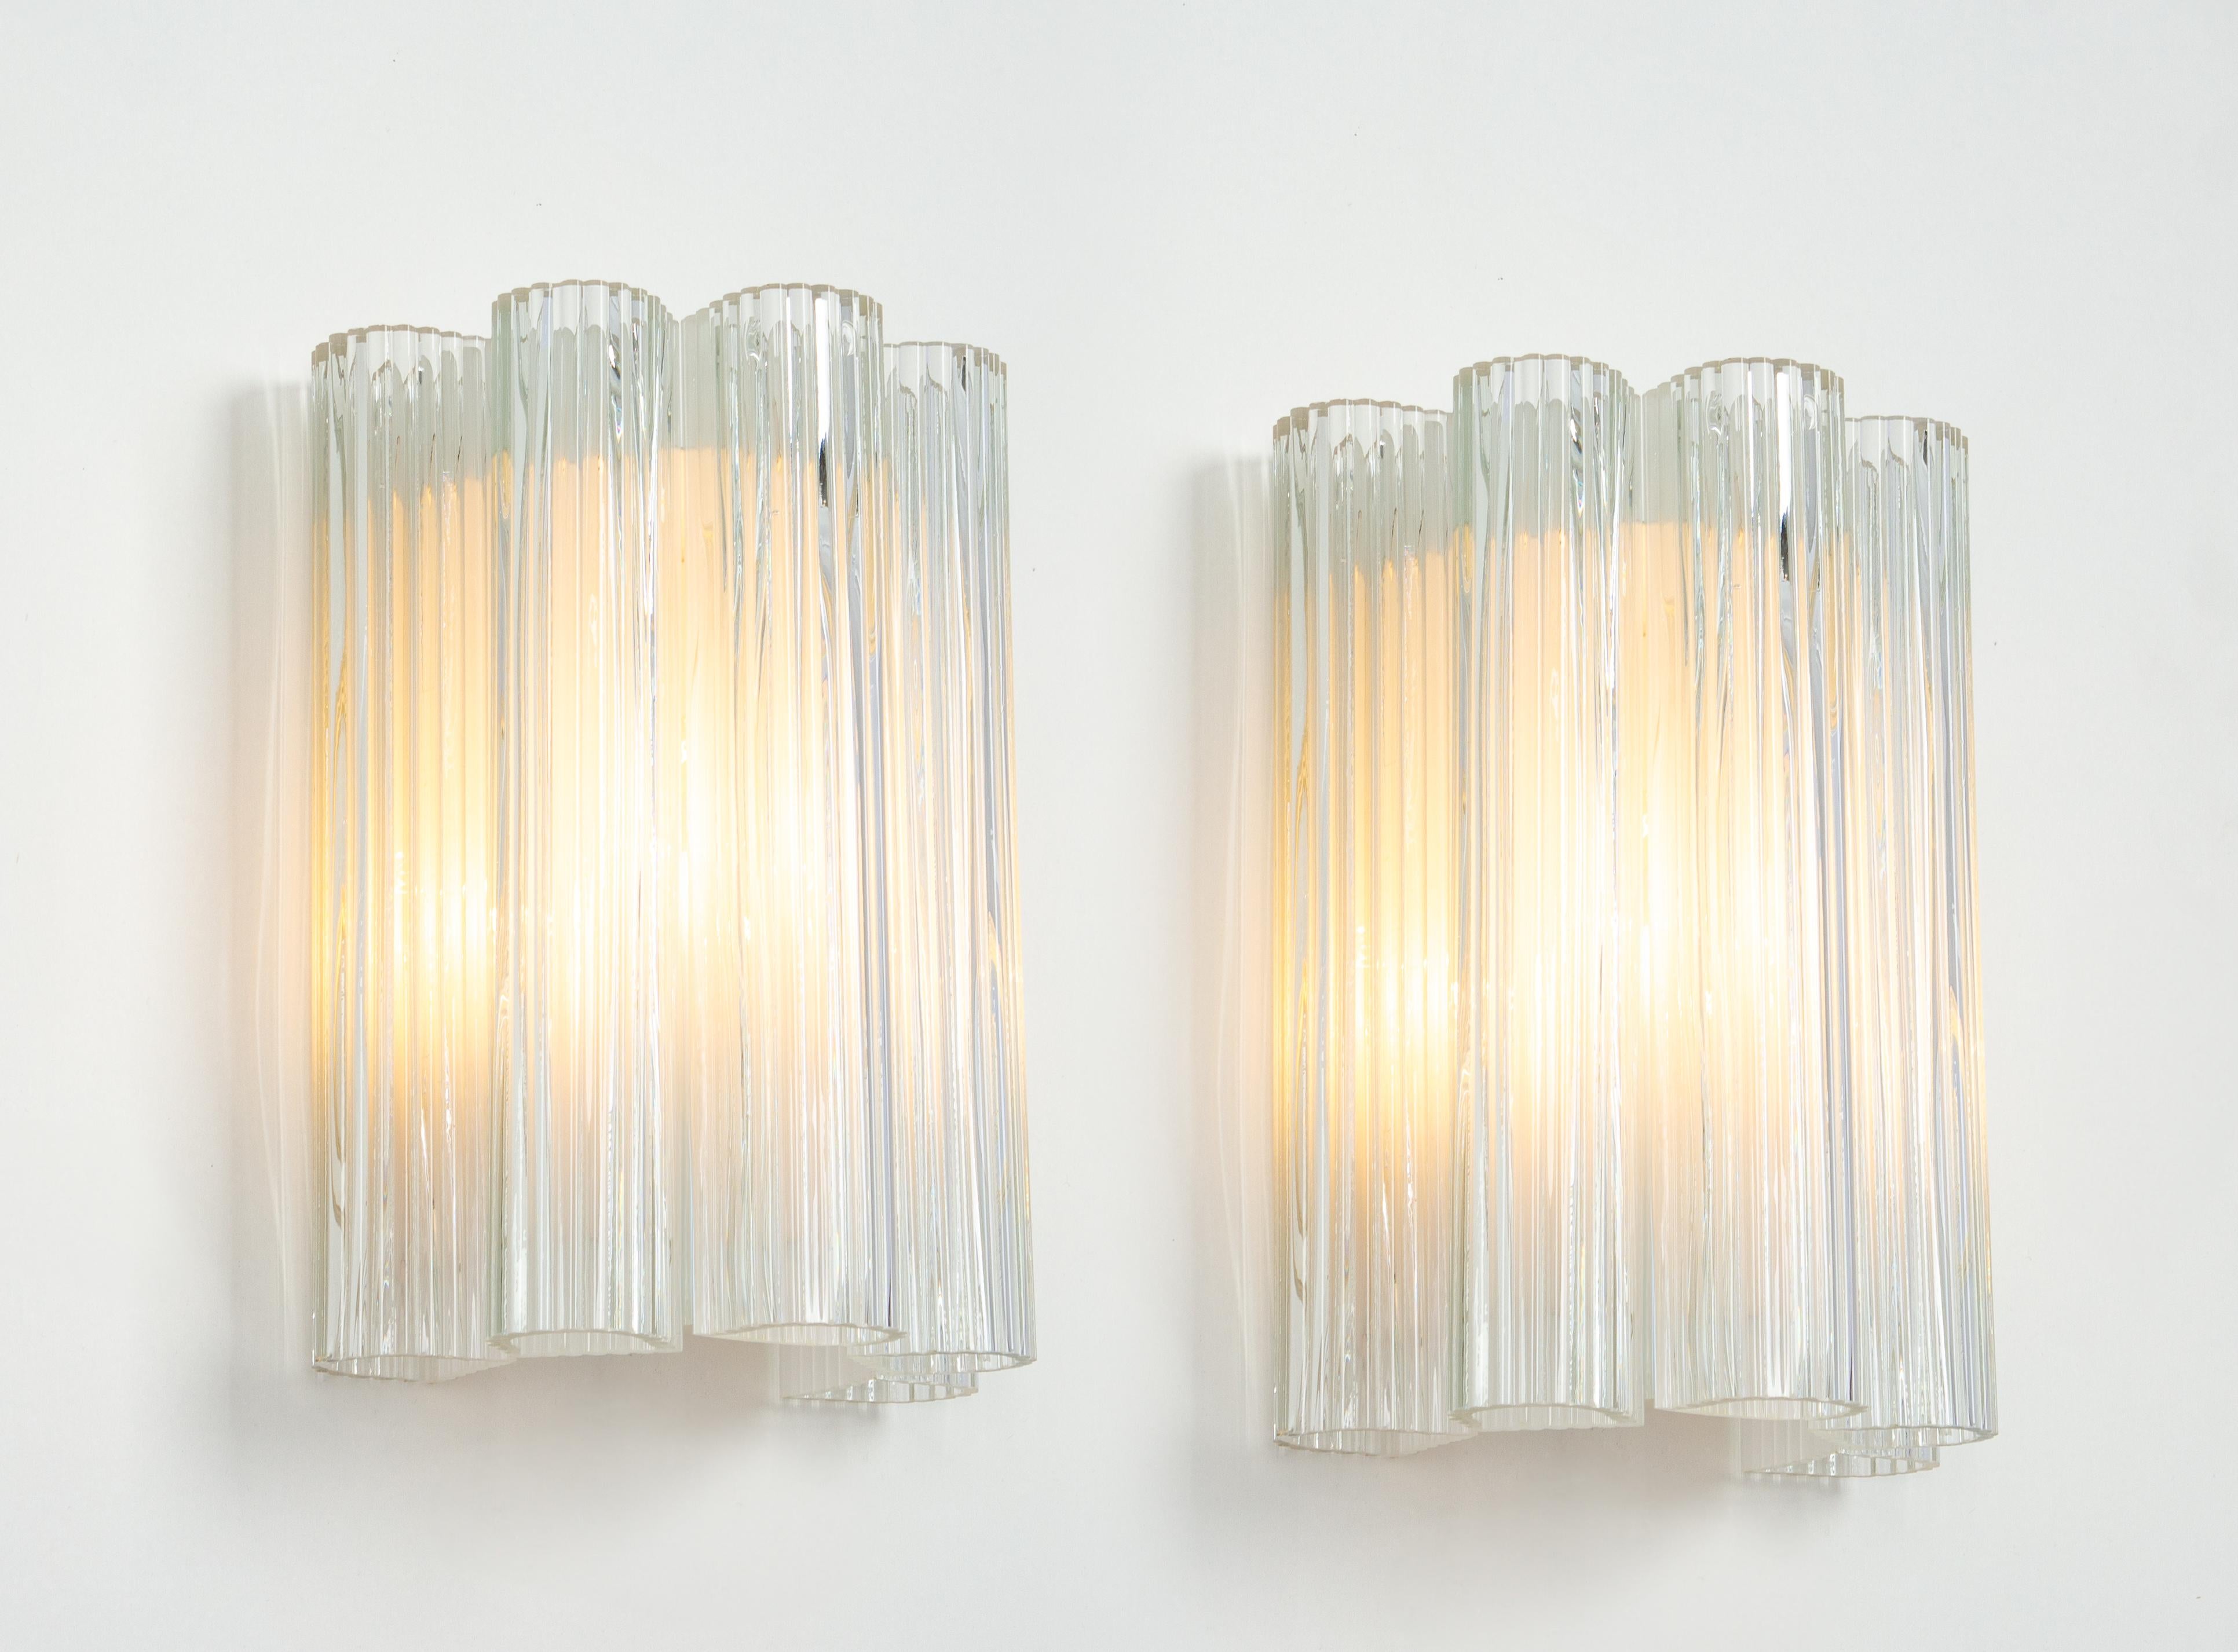 1 of 4 Large Murano Glass Wall Sconces by Doria, Germany, 1960s For Sale 1